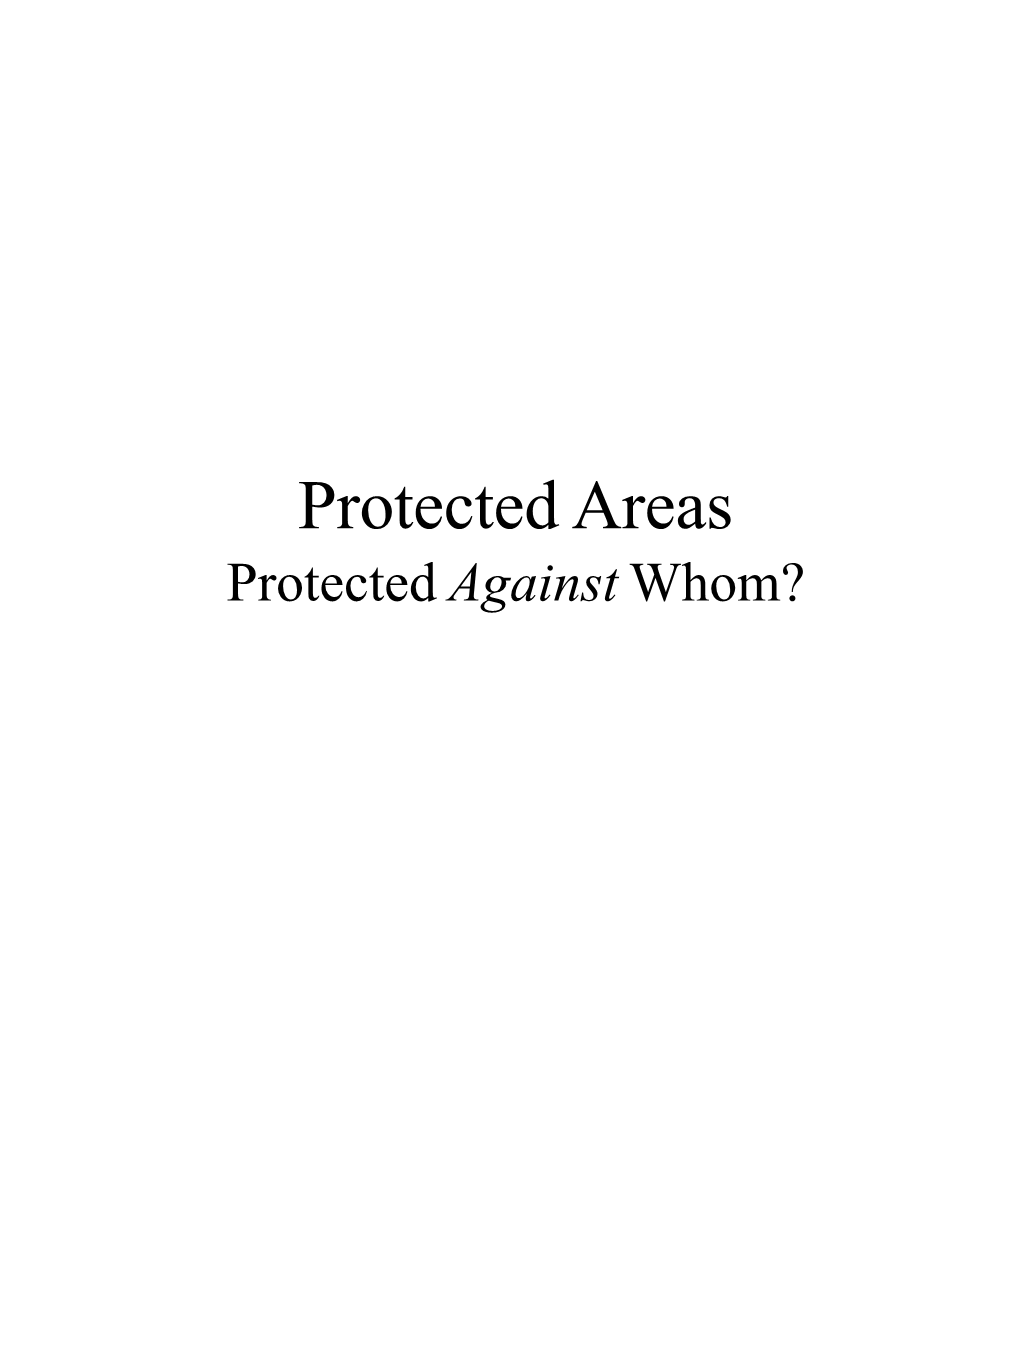 Protected Areas. Protected Against Whom? 3